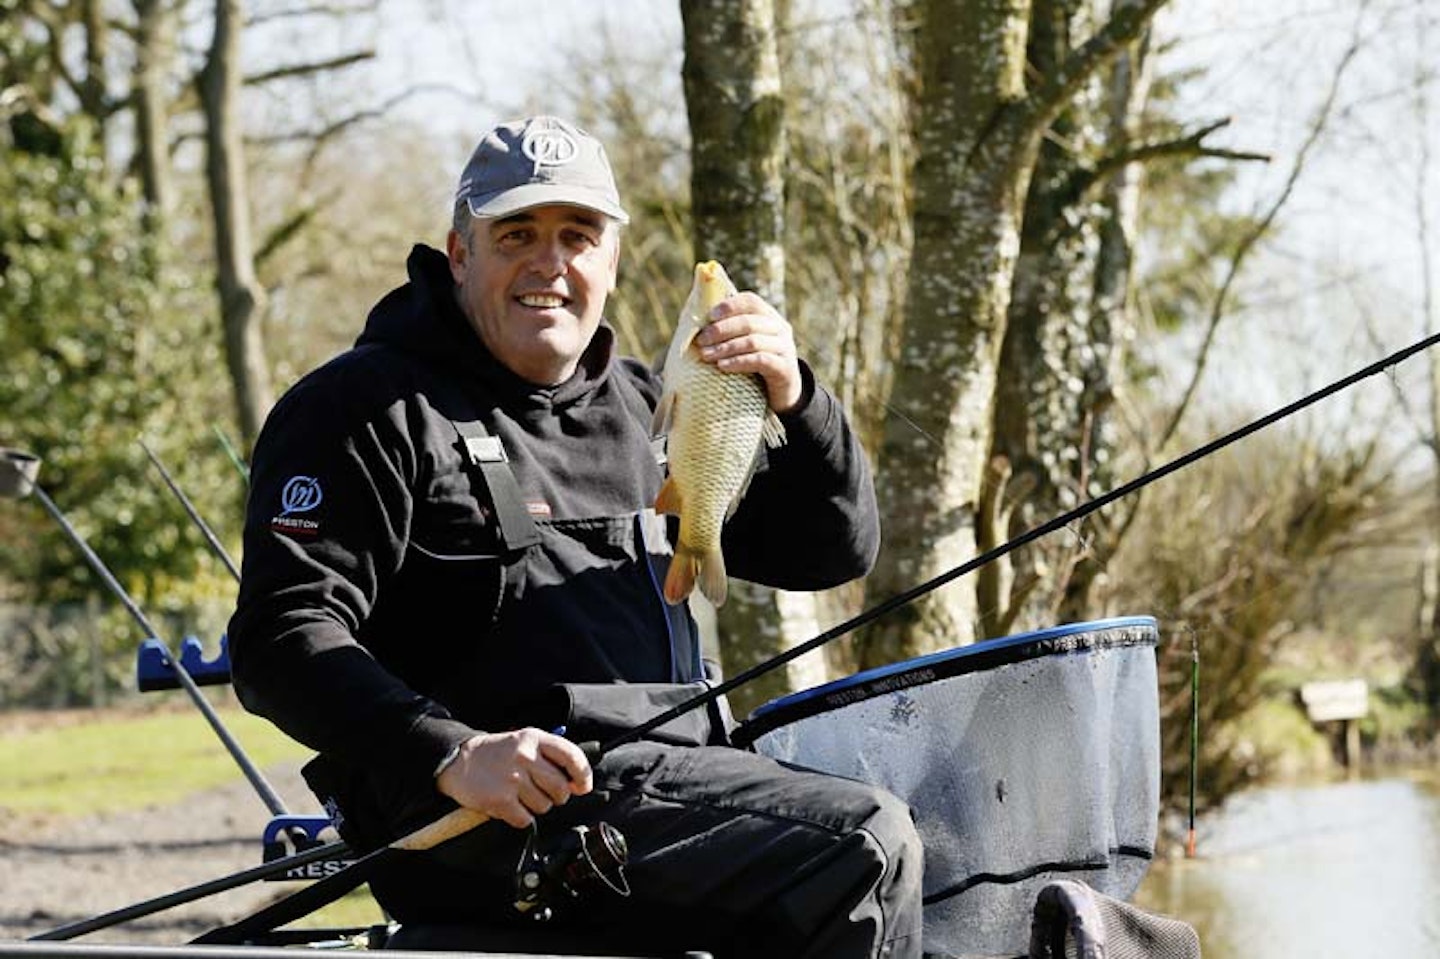 Rhode Island Carp Fishing: What's with Those 12 foot Carp Rods?